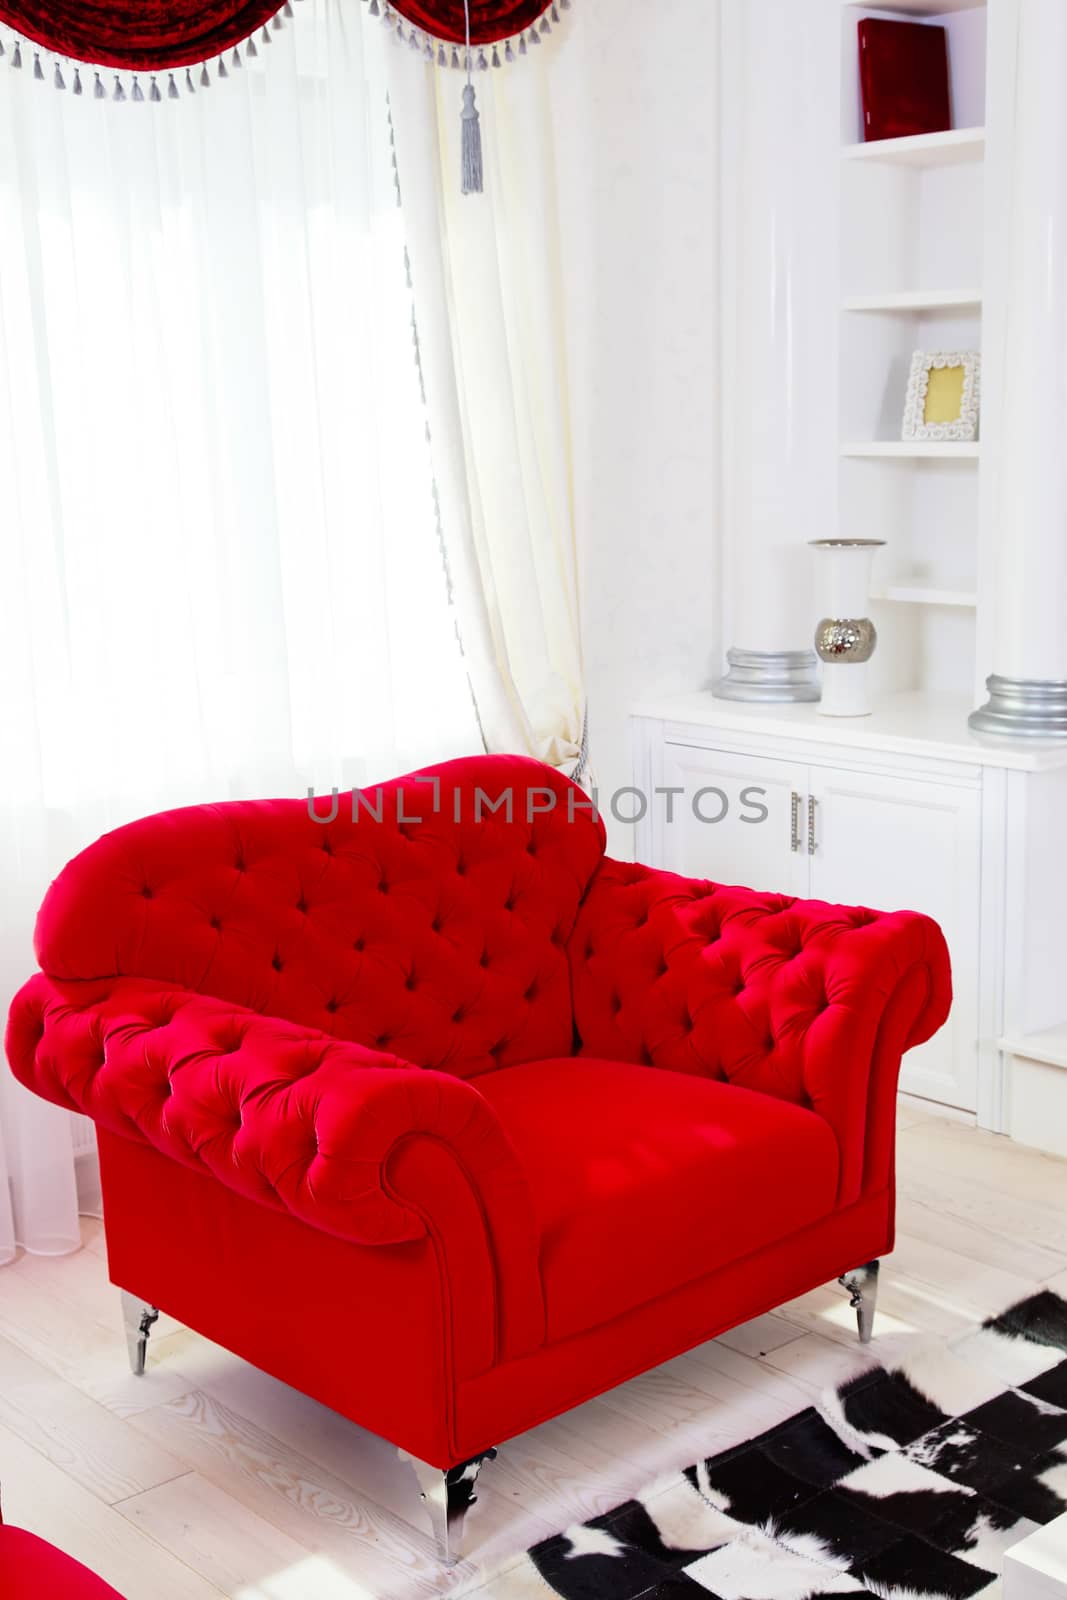 Red classical armchair and white curtains in interior